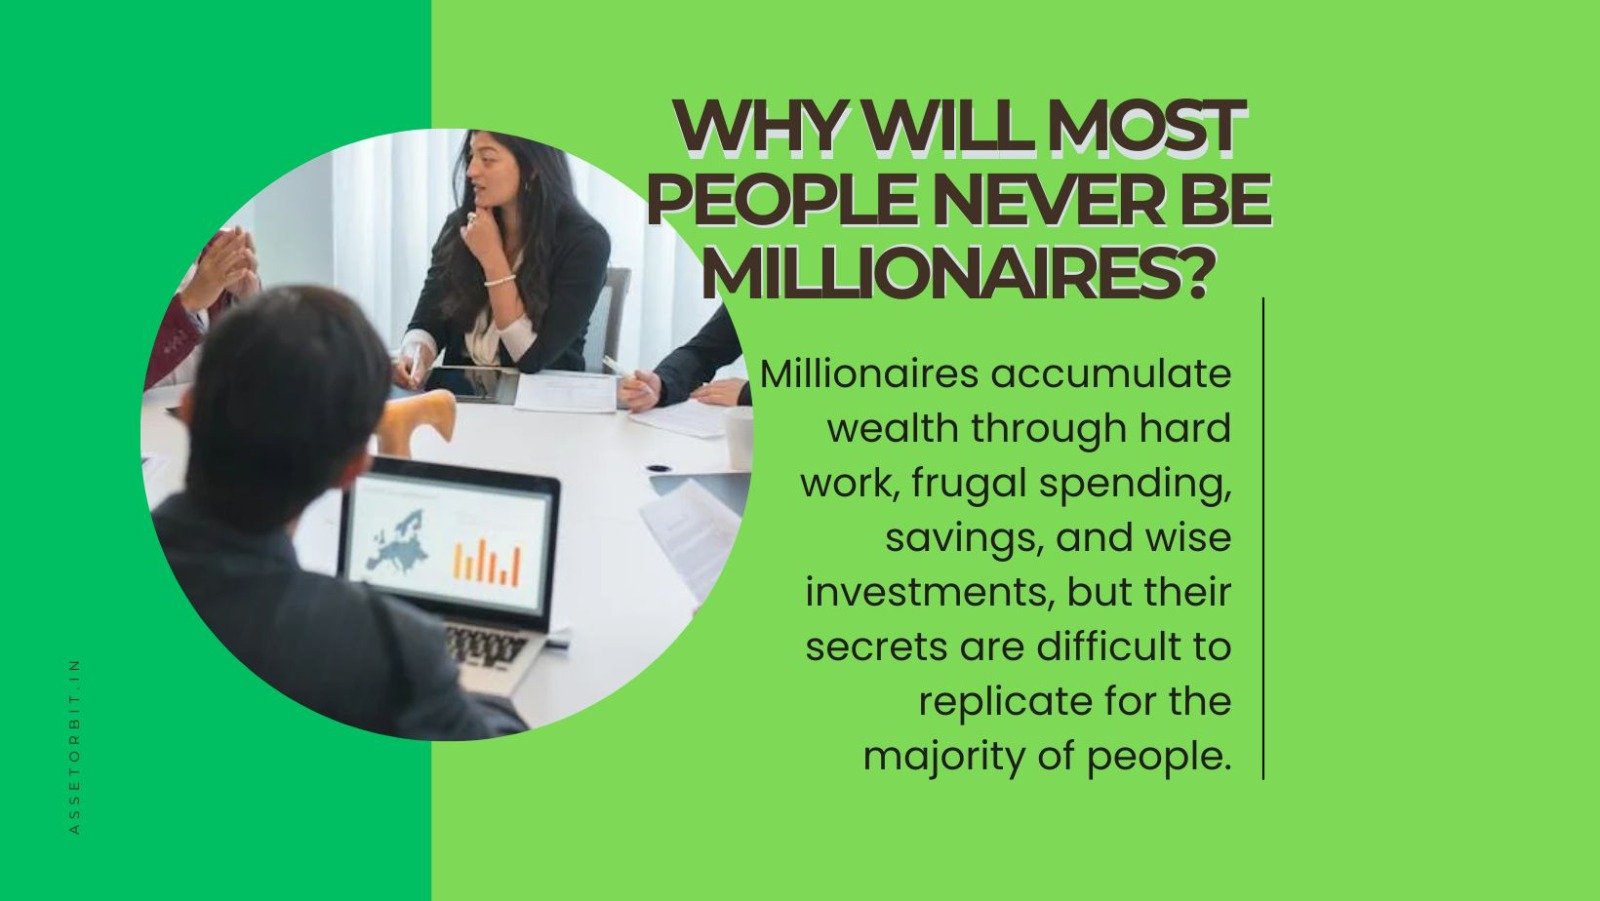 Most People Never Be Millionaires